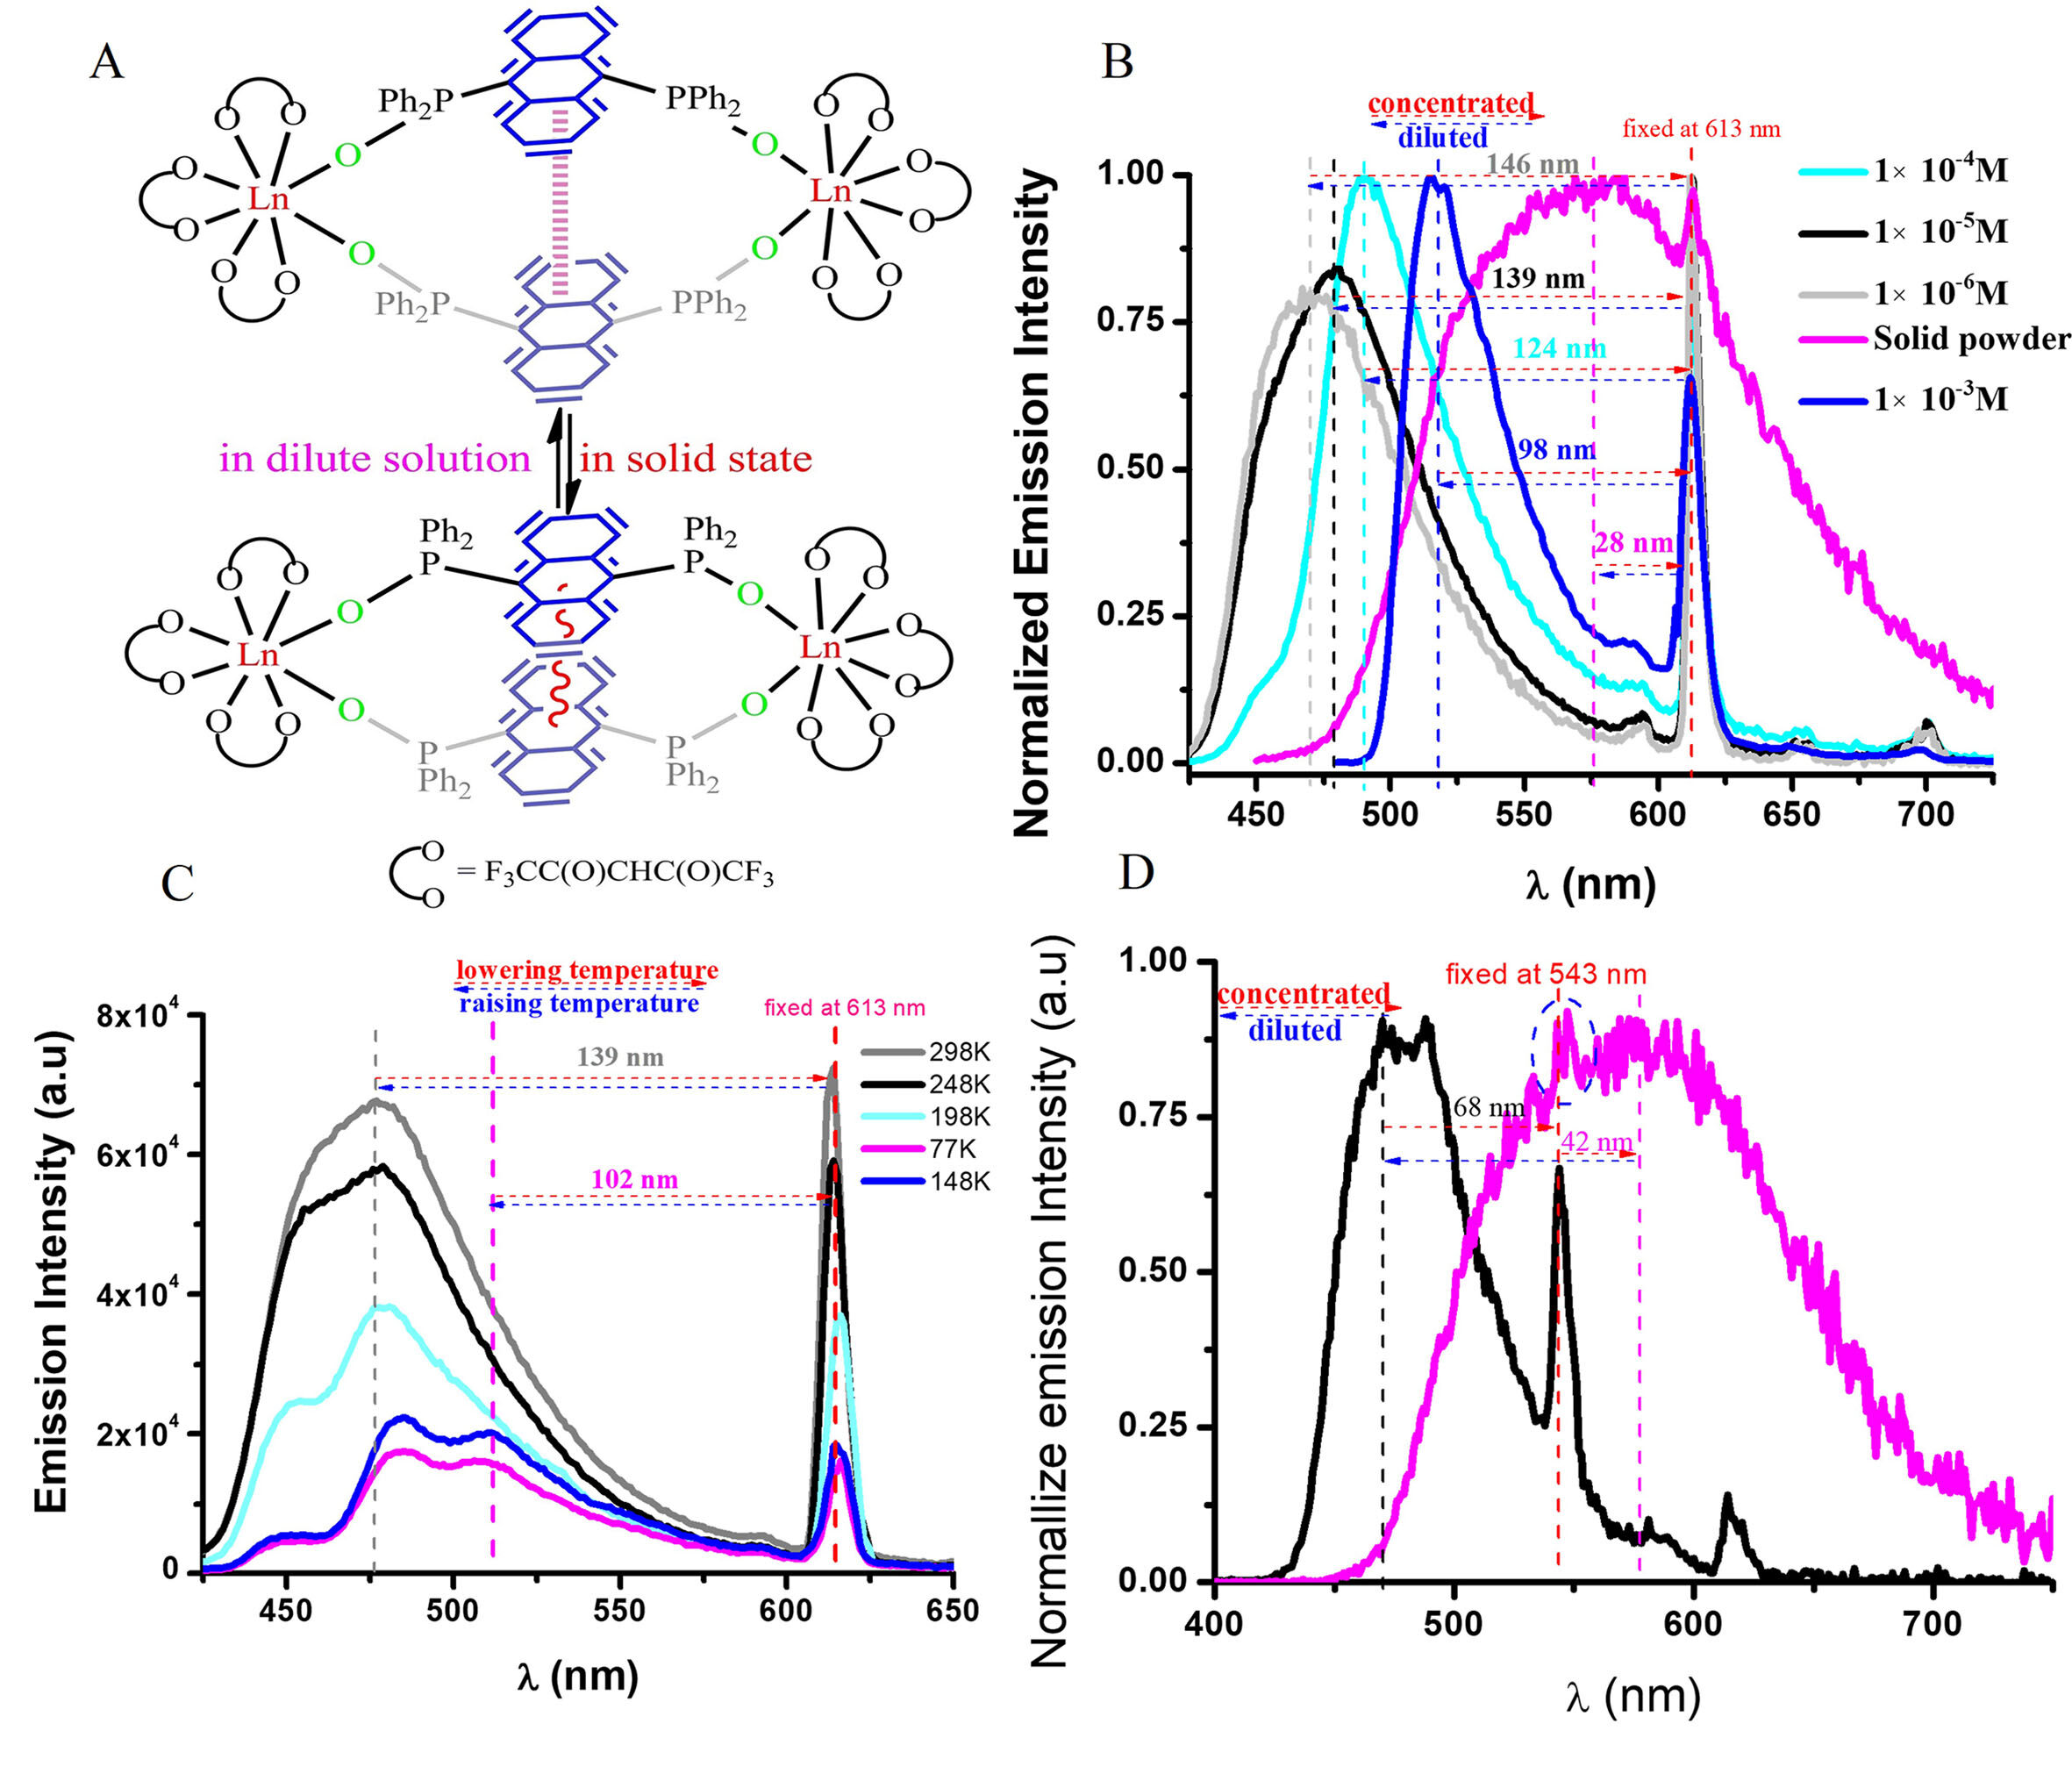 Energy transfer process, luminescence optimizing and various applications of lanthanide complexes